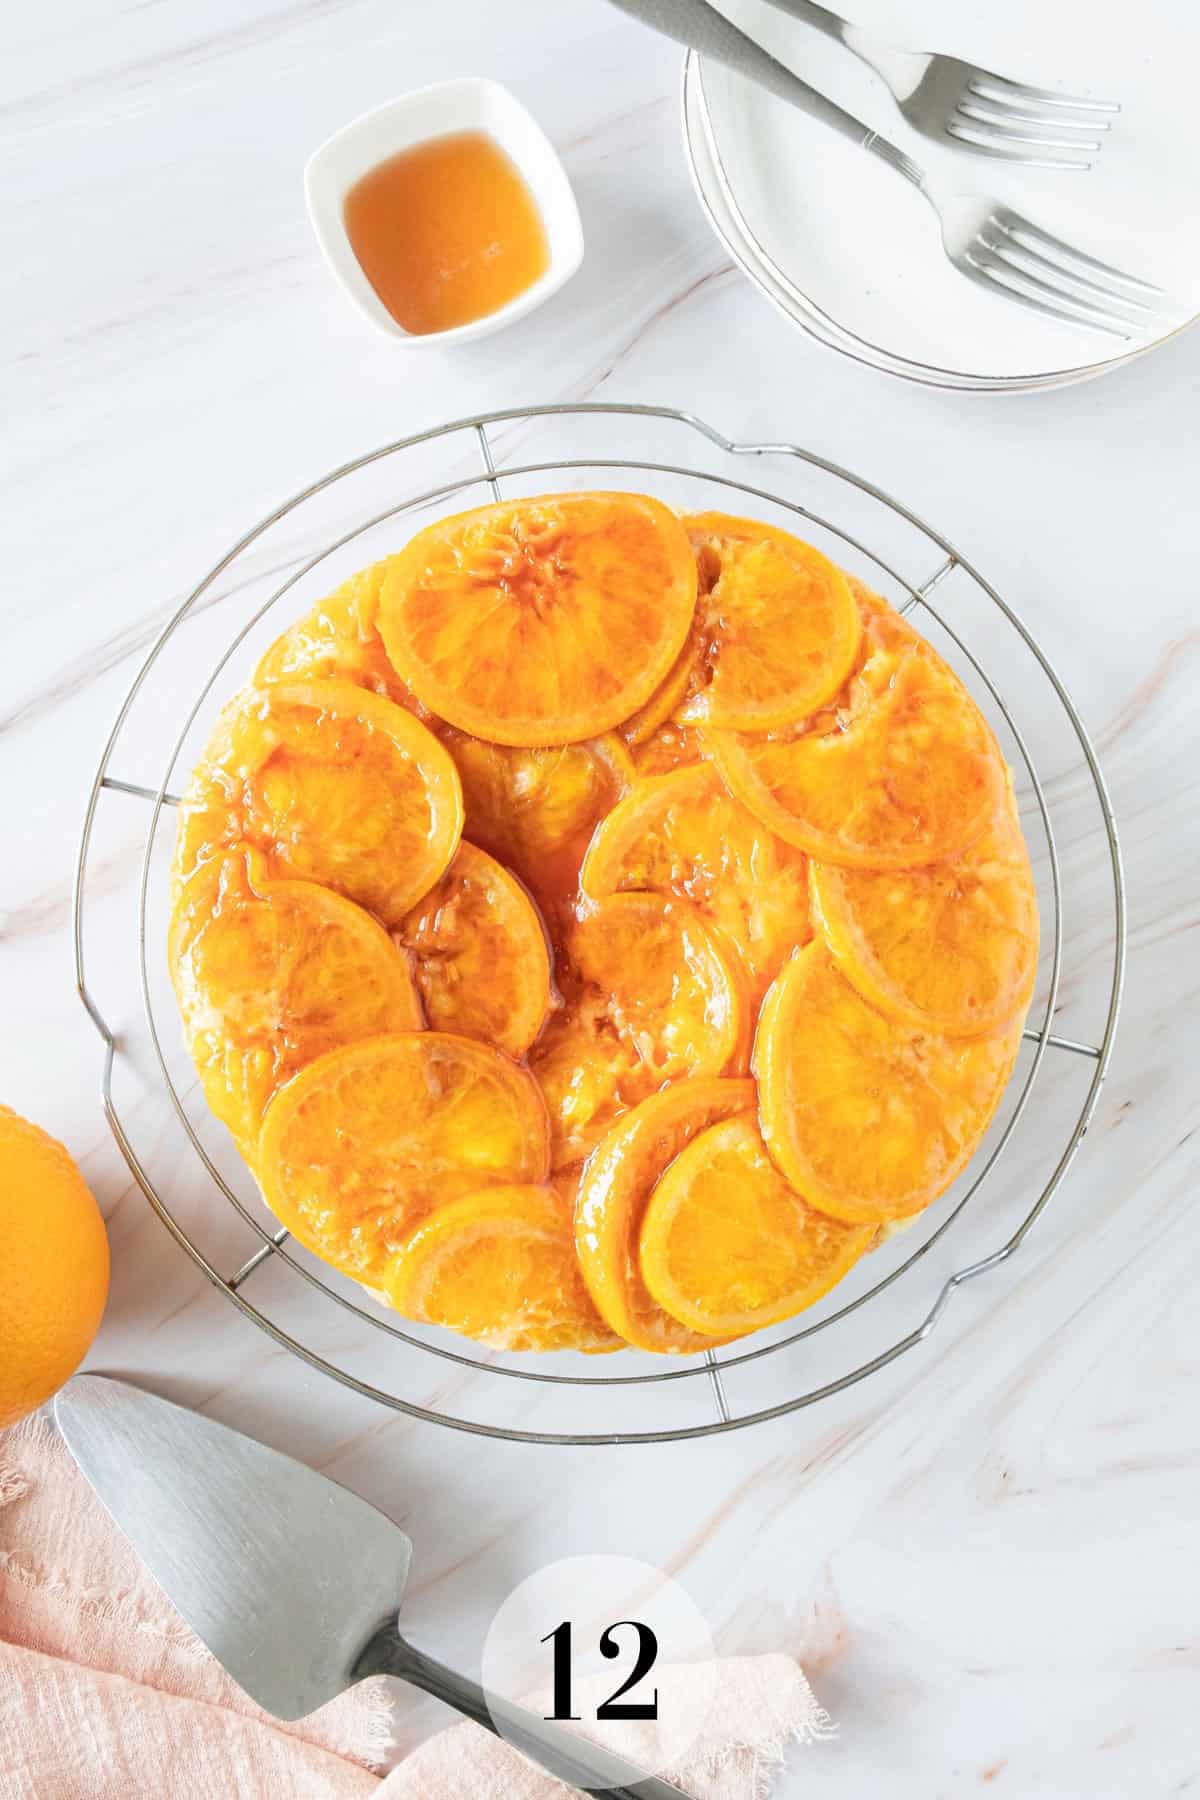 An orange cake on a plate with a fork next to it.